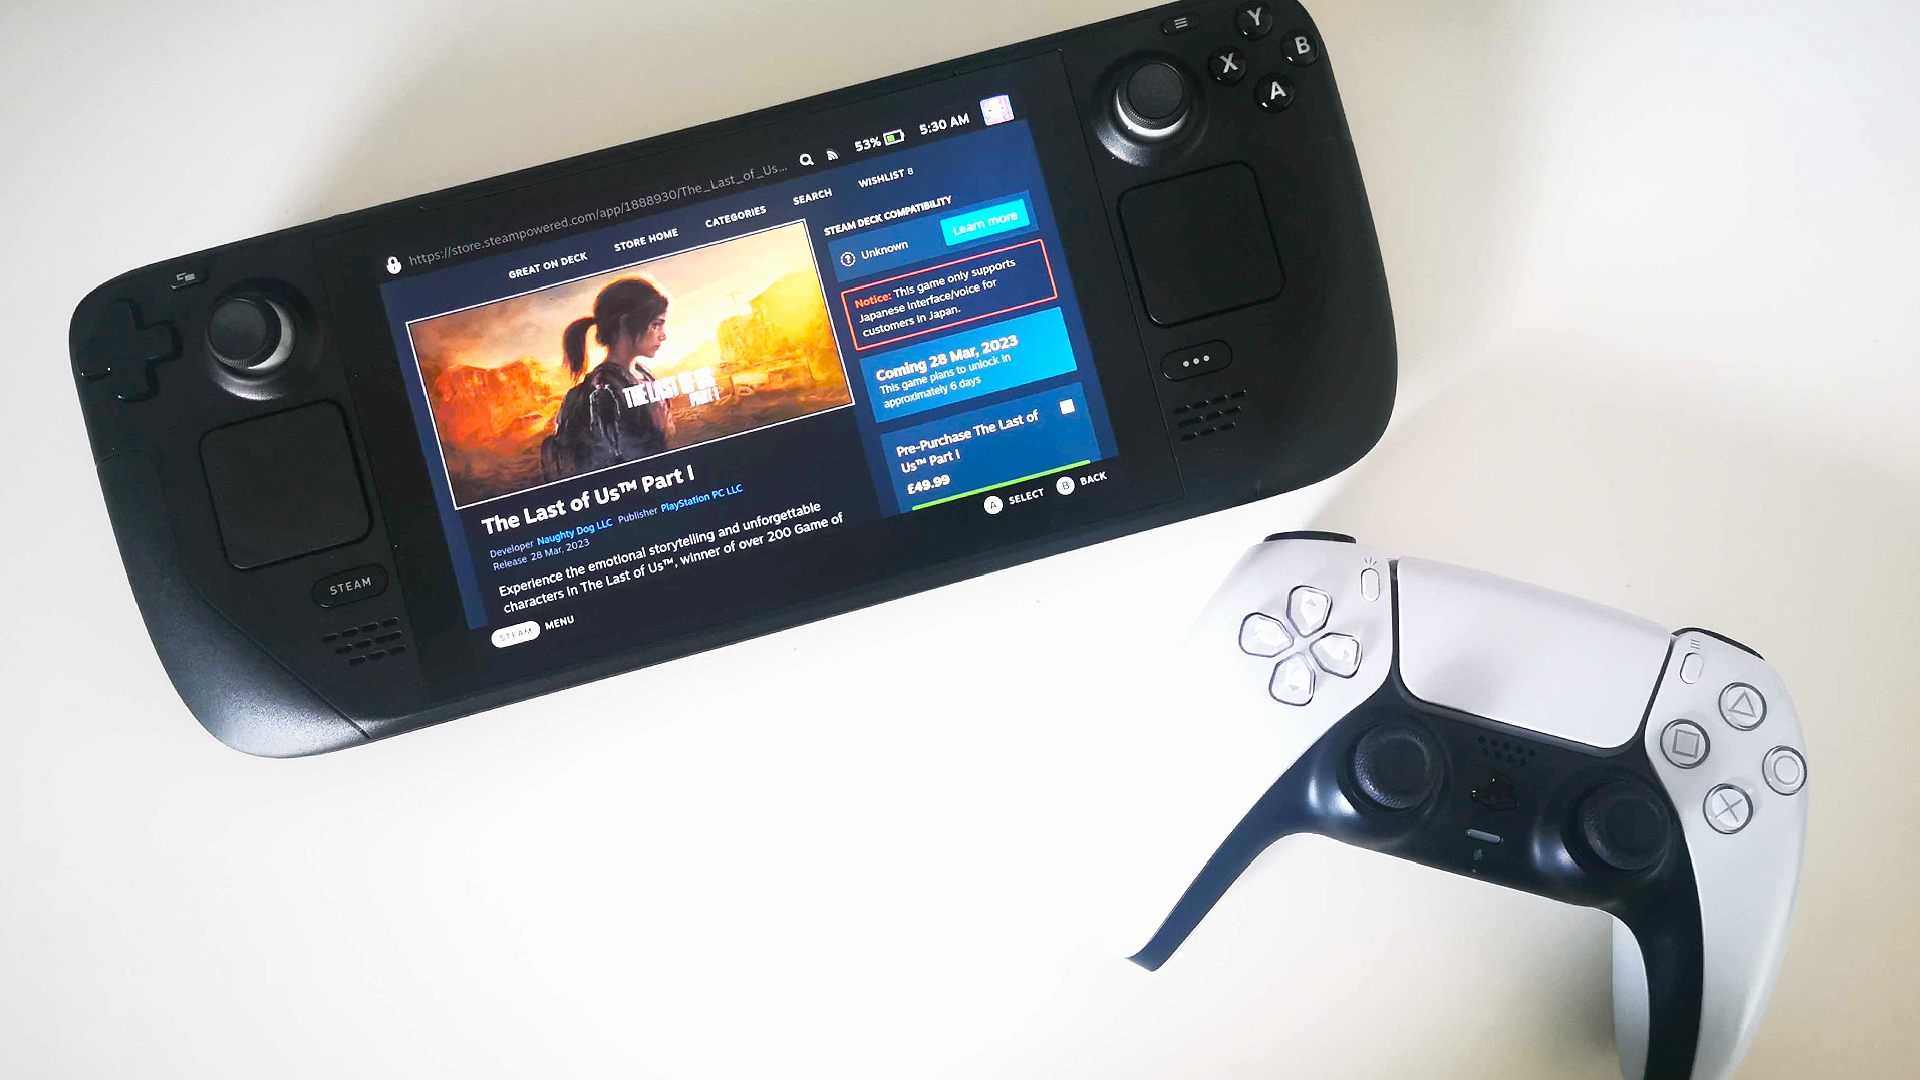 The Last of Us Steam Deck: Handheld next to PlayStation DualSense controller